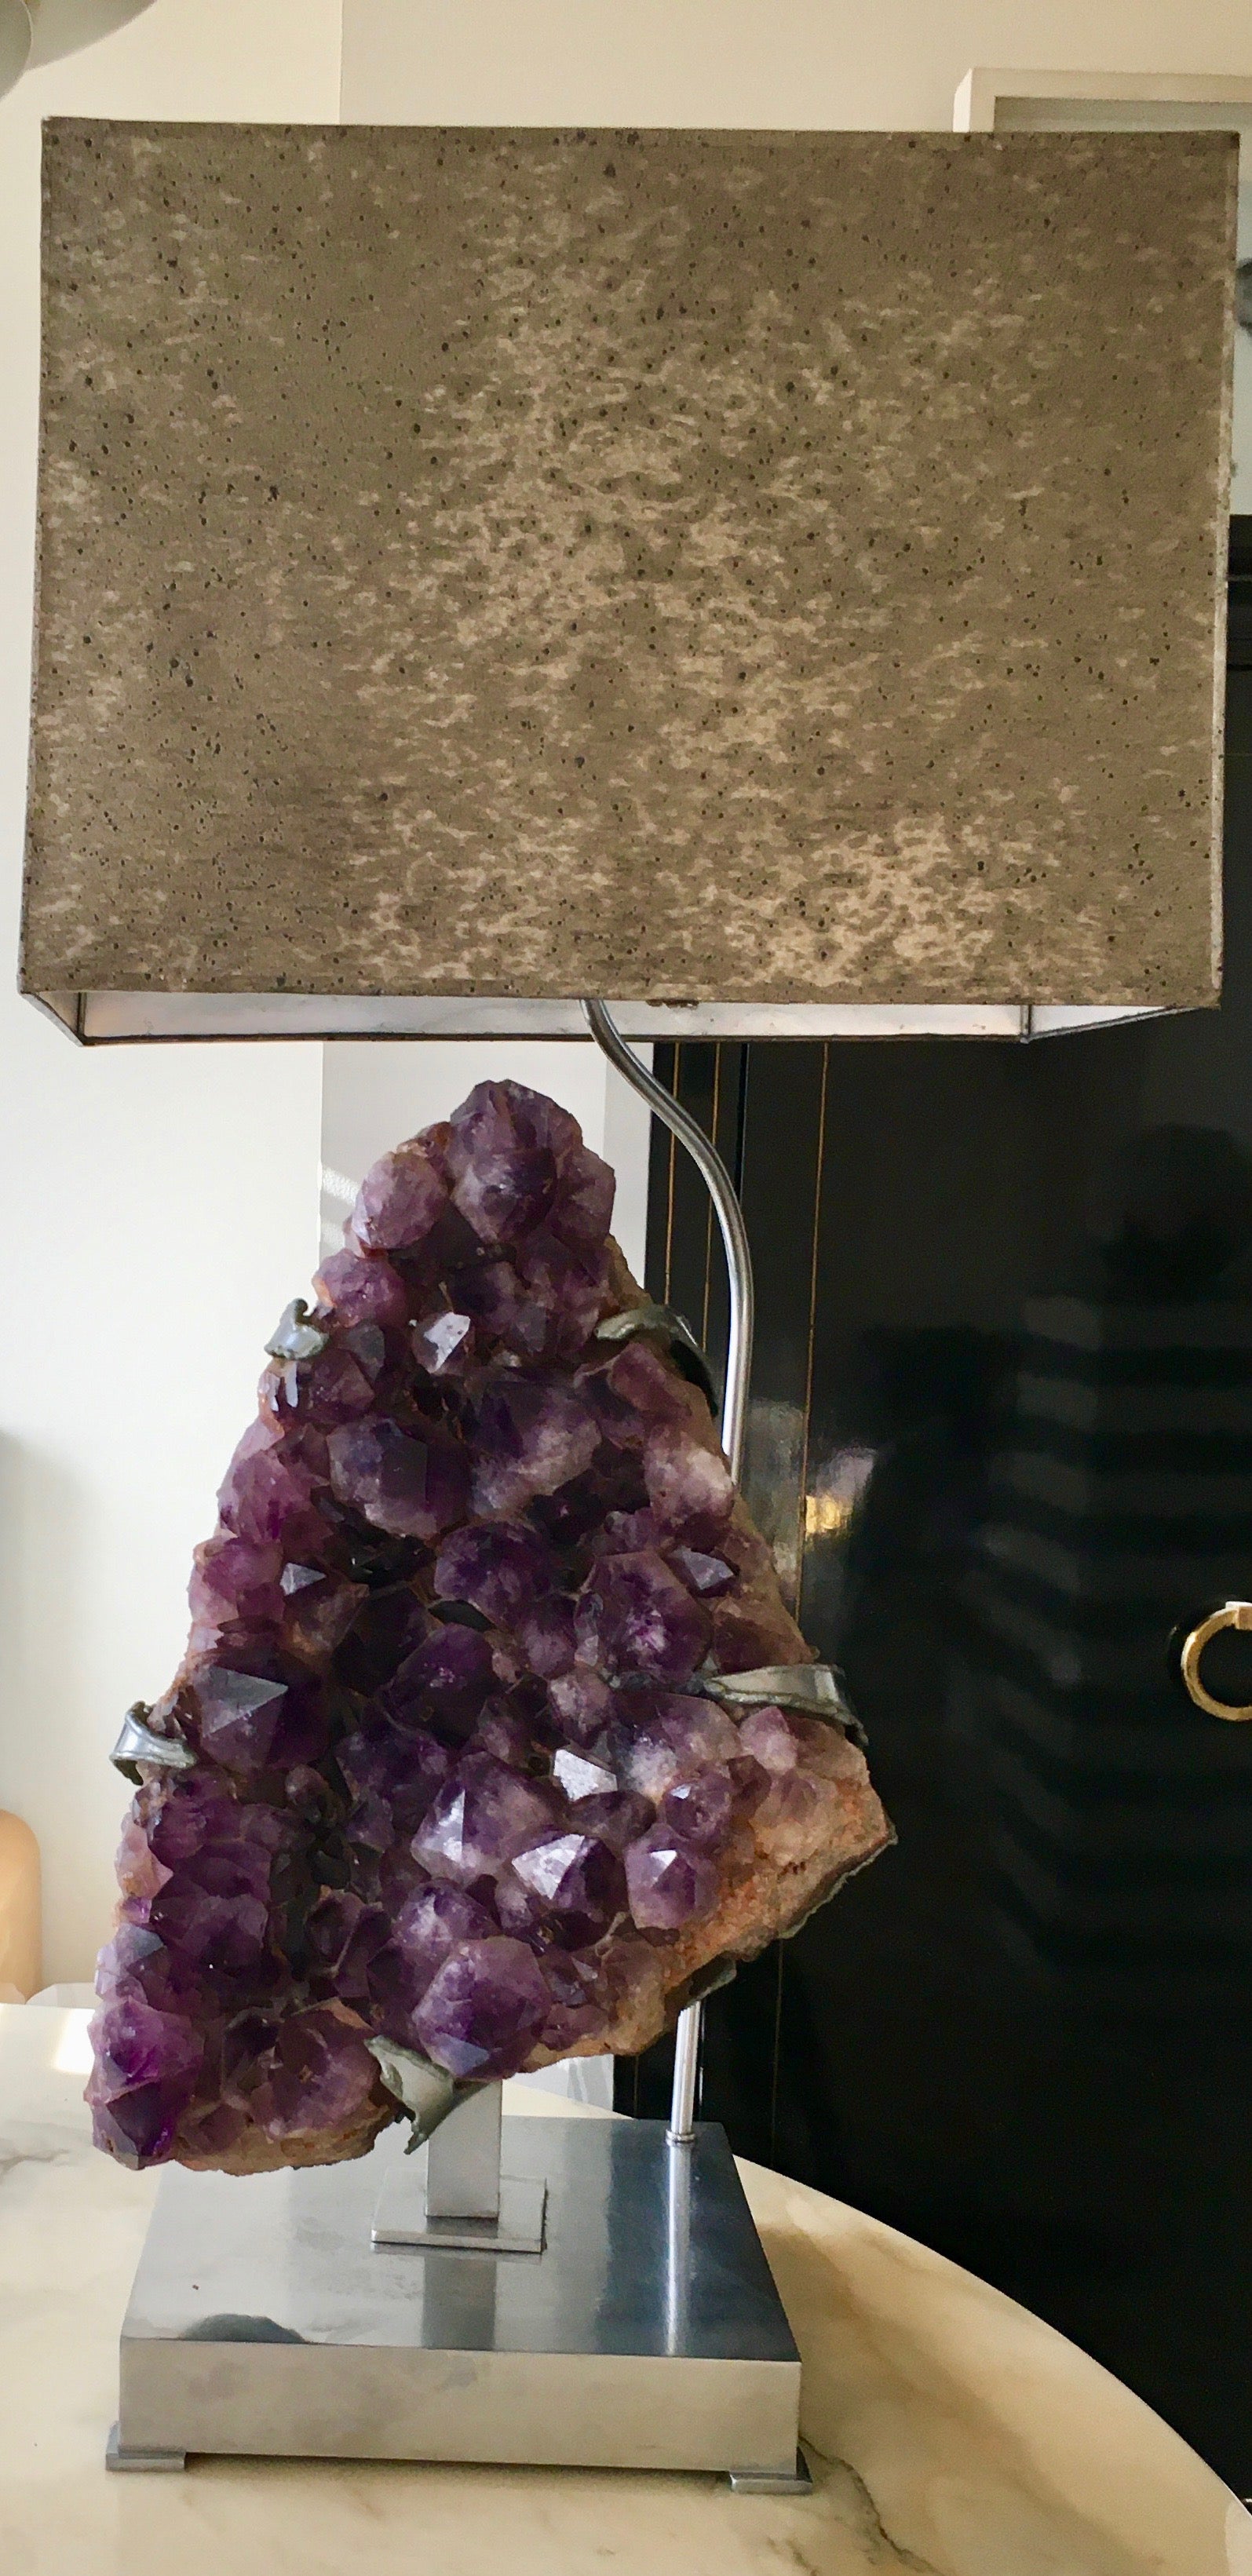 One of a kind giant amethyst geode lamp table.
Two lights.Coming with his original silver cardboard shade.
Designed by Willy Daro. 
Belgium 1968.
Nicht signiert.